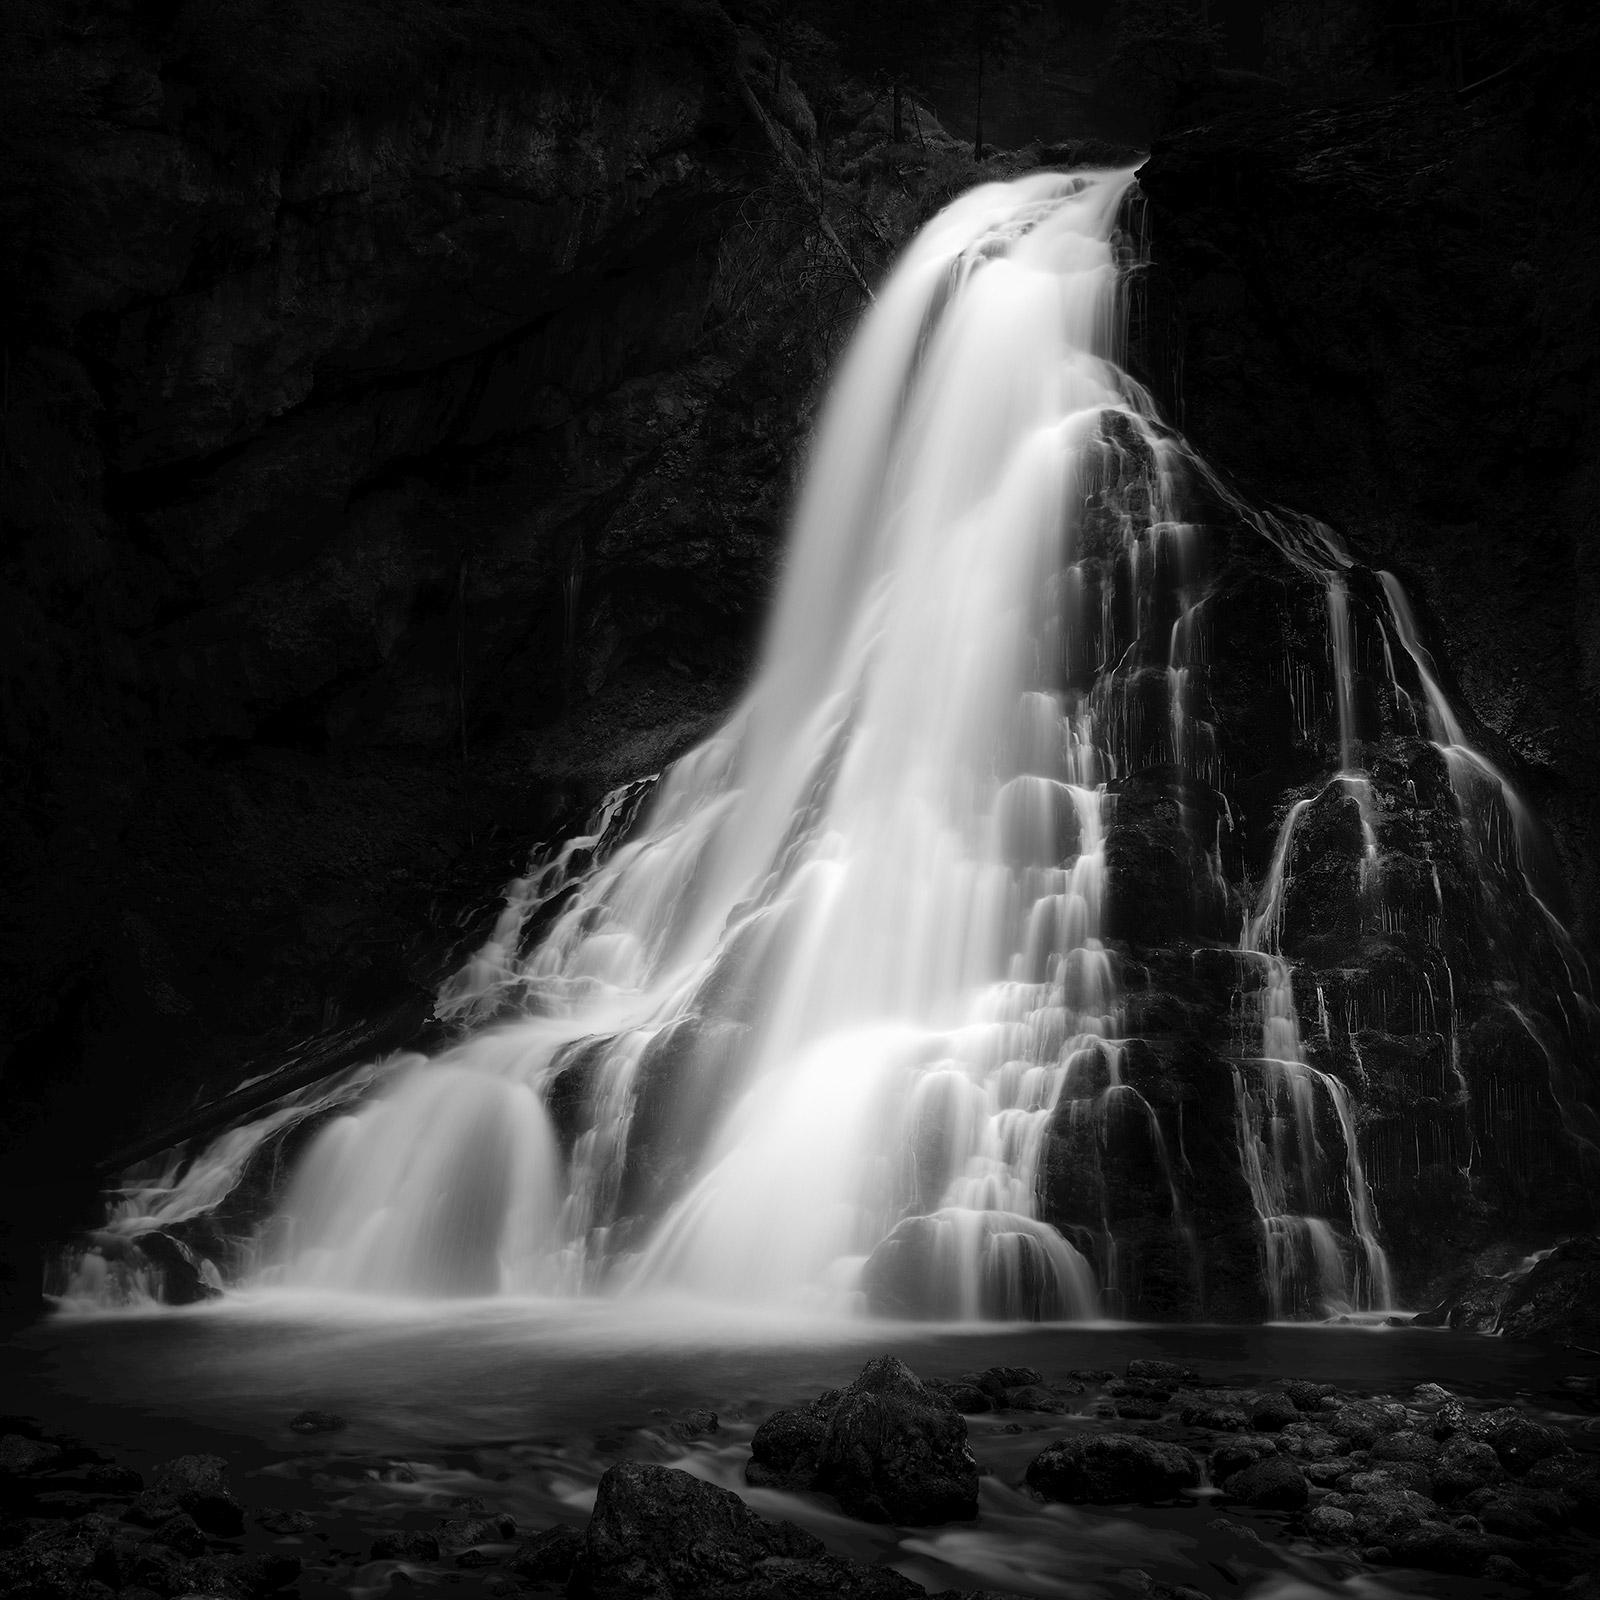 Golling Falls, waterfall, Austria, black and white photography, art landscape